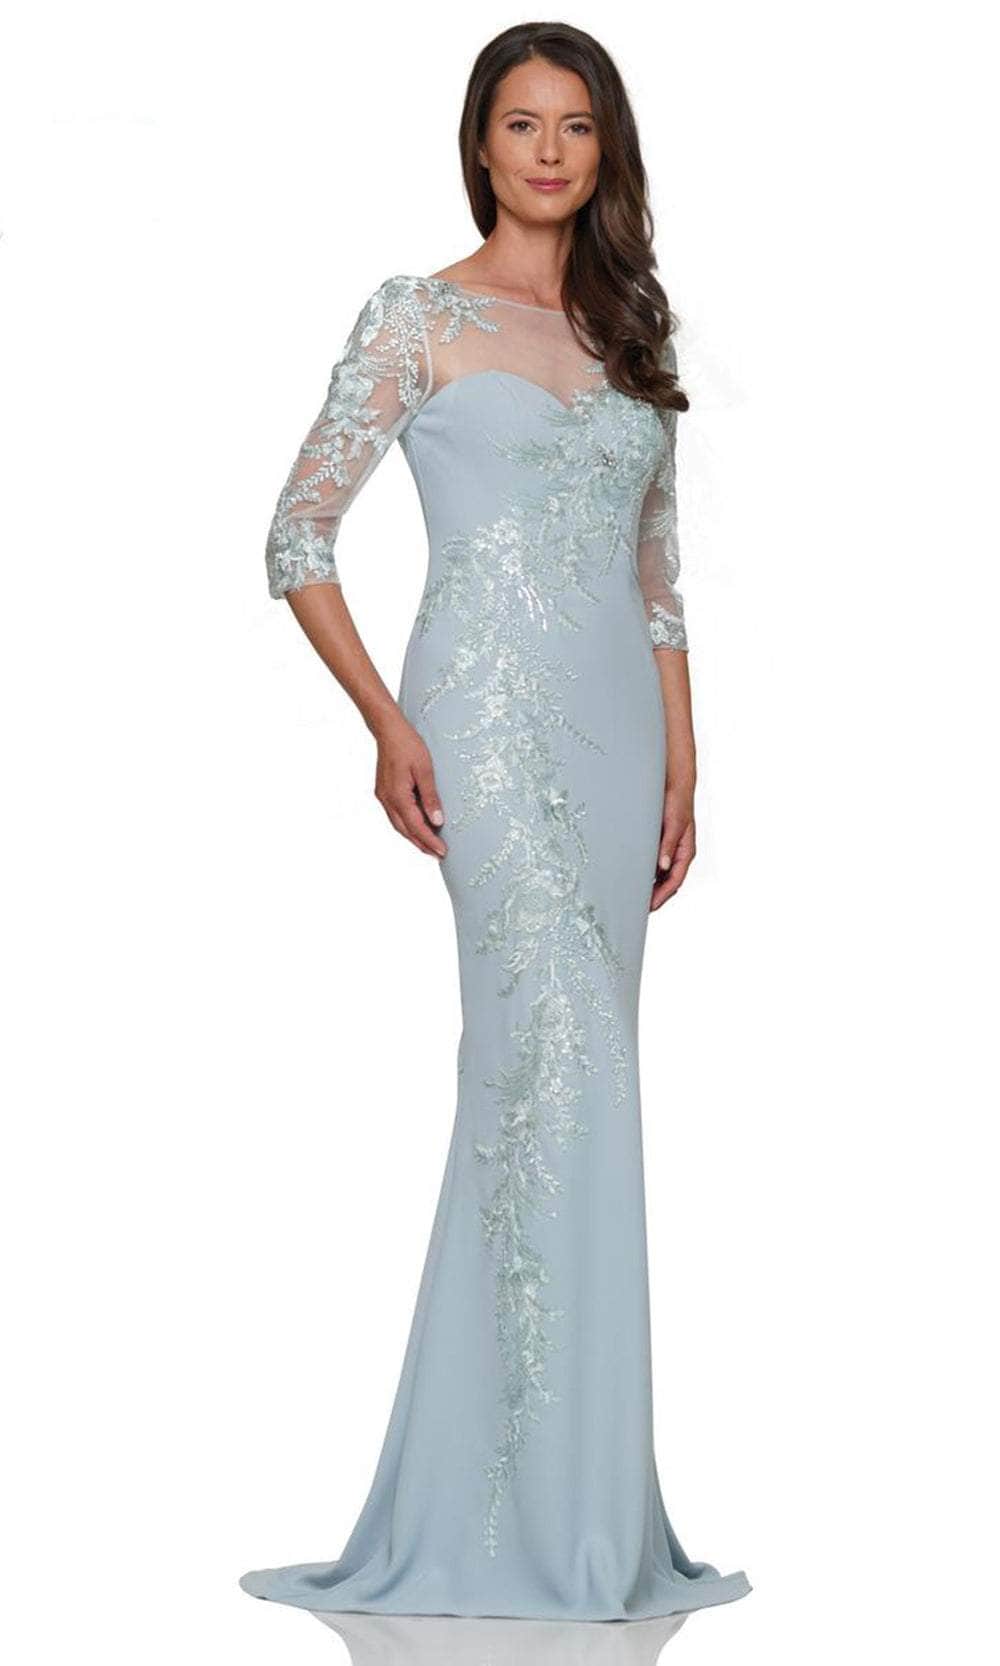 Marsoni by Colors MV1274 - Illusion Bateau Neck Embroidered Long Dress Special Occasion Dress